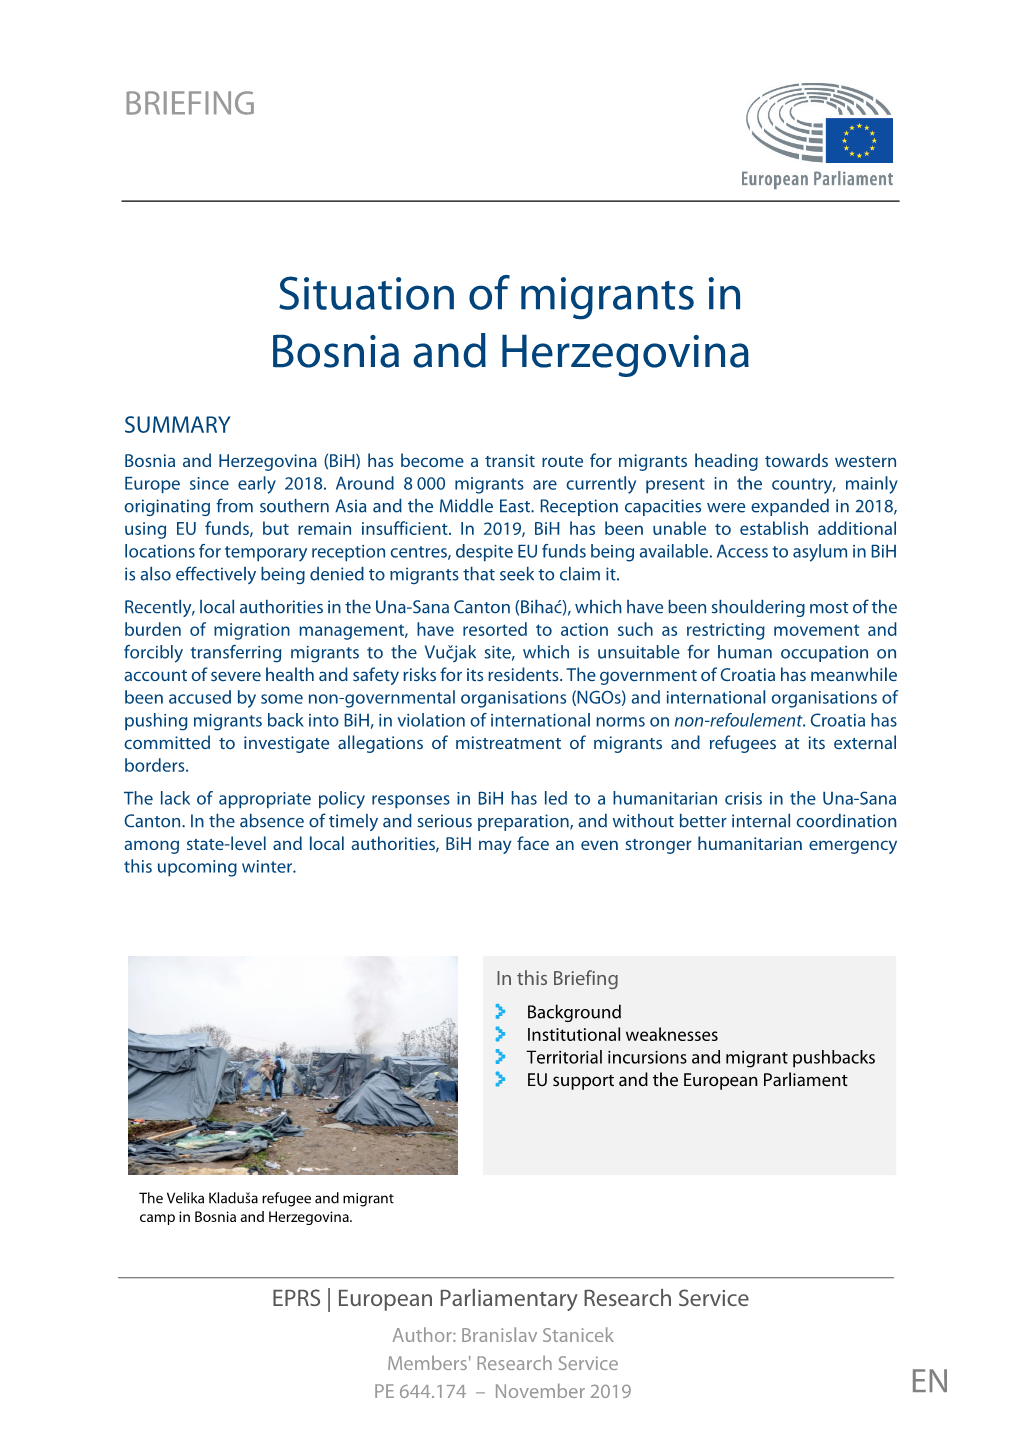 Situation of Migrants in Bosnia and Herzegovina